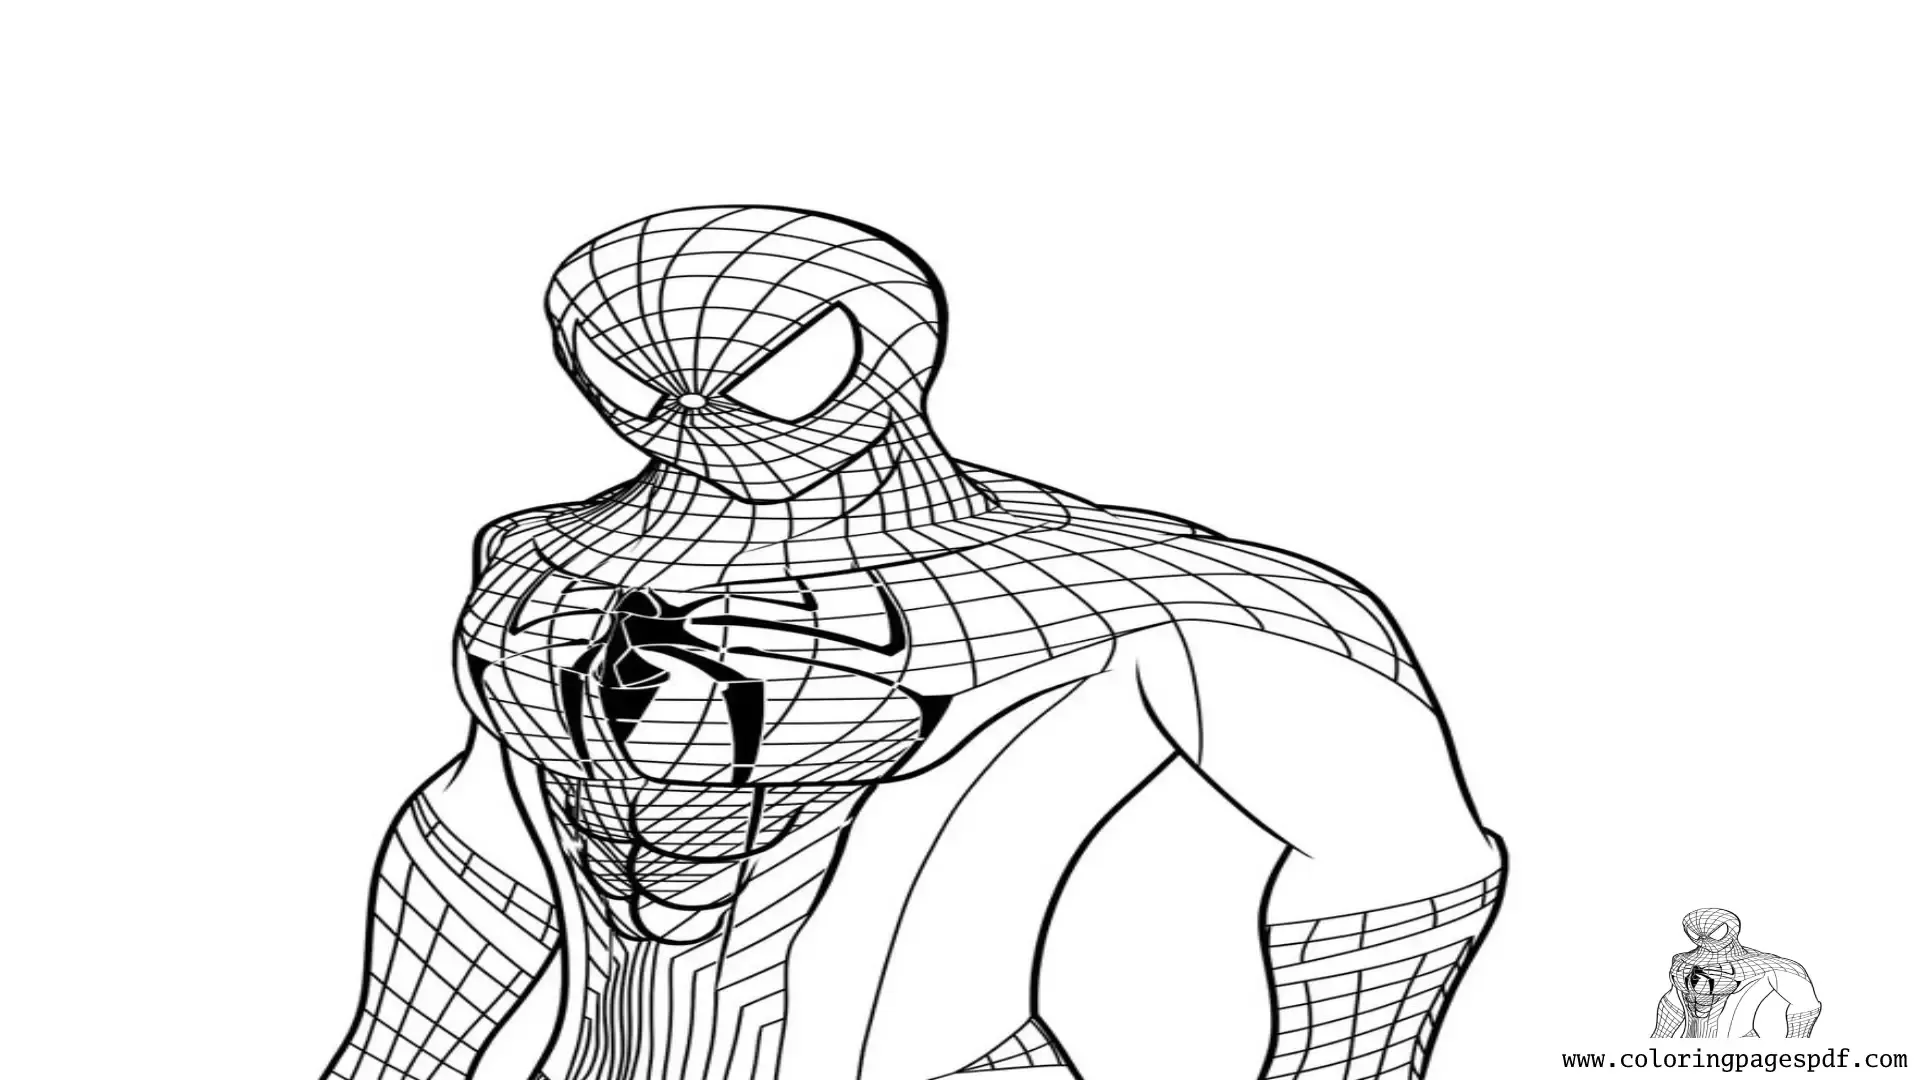 Coloring Page Of A Normal Spiderman Pose